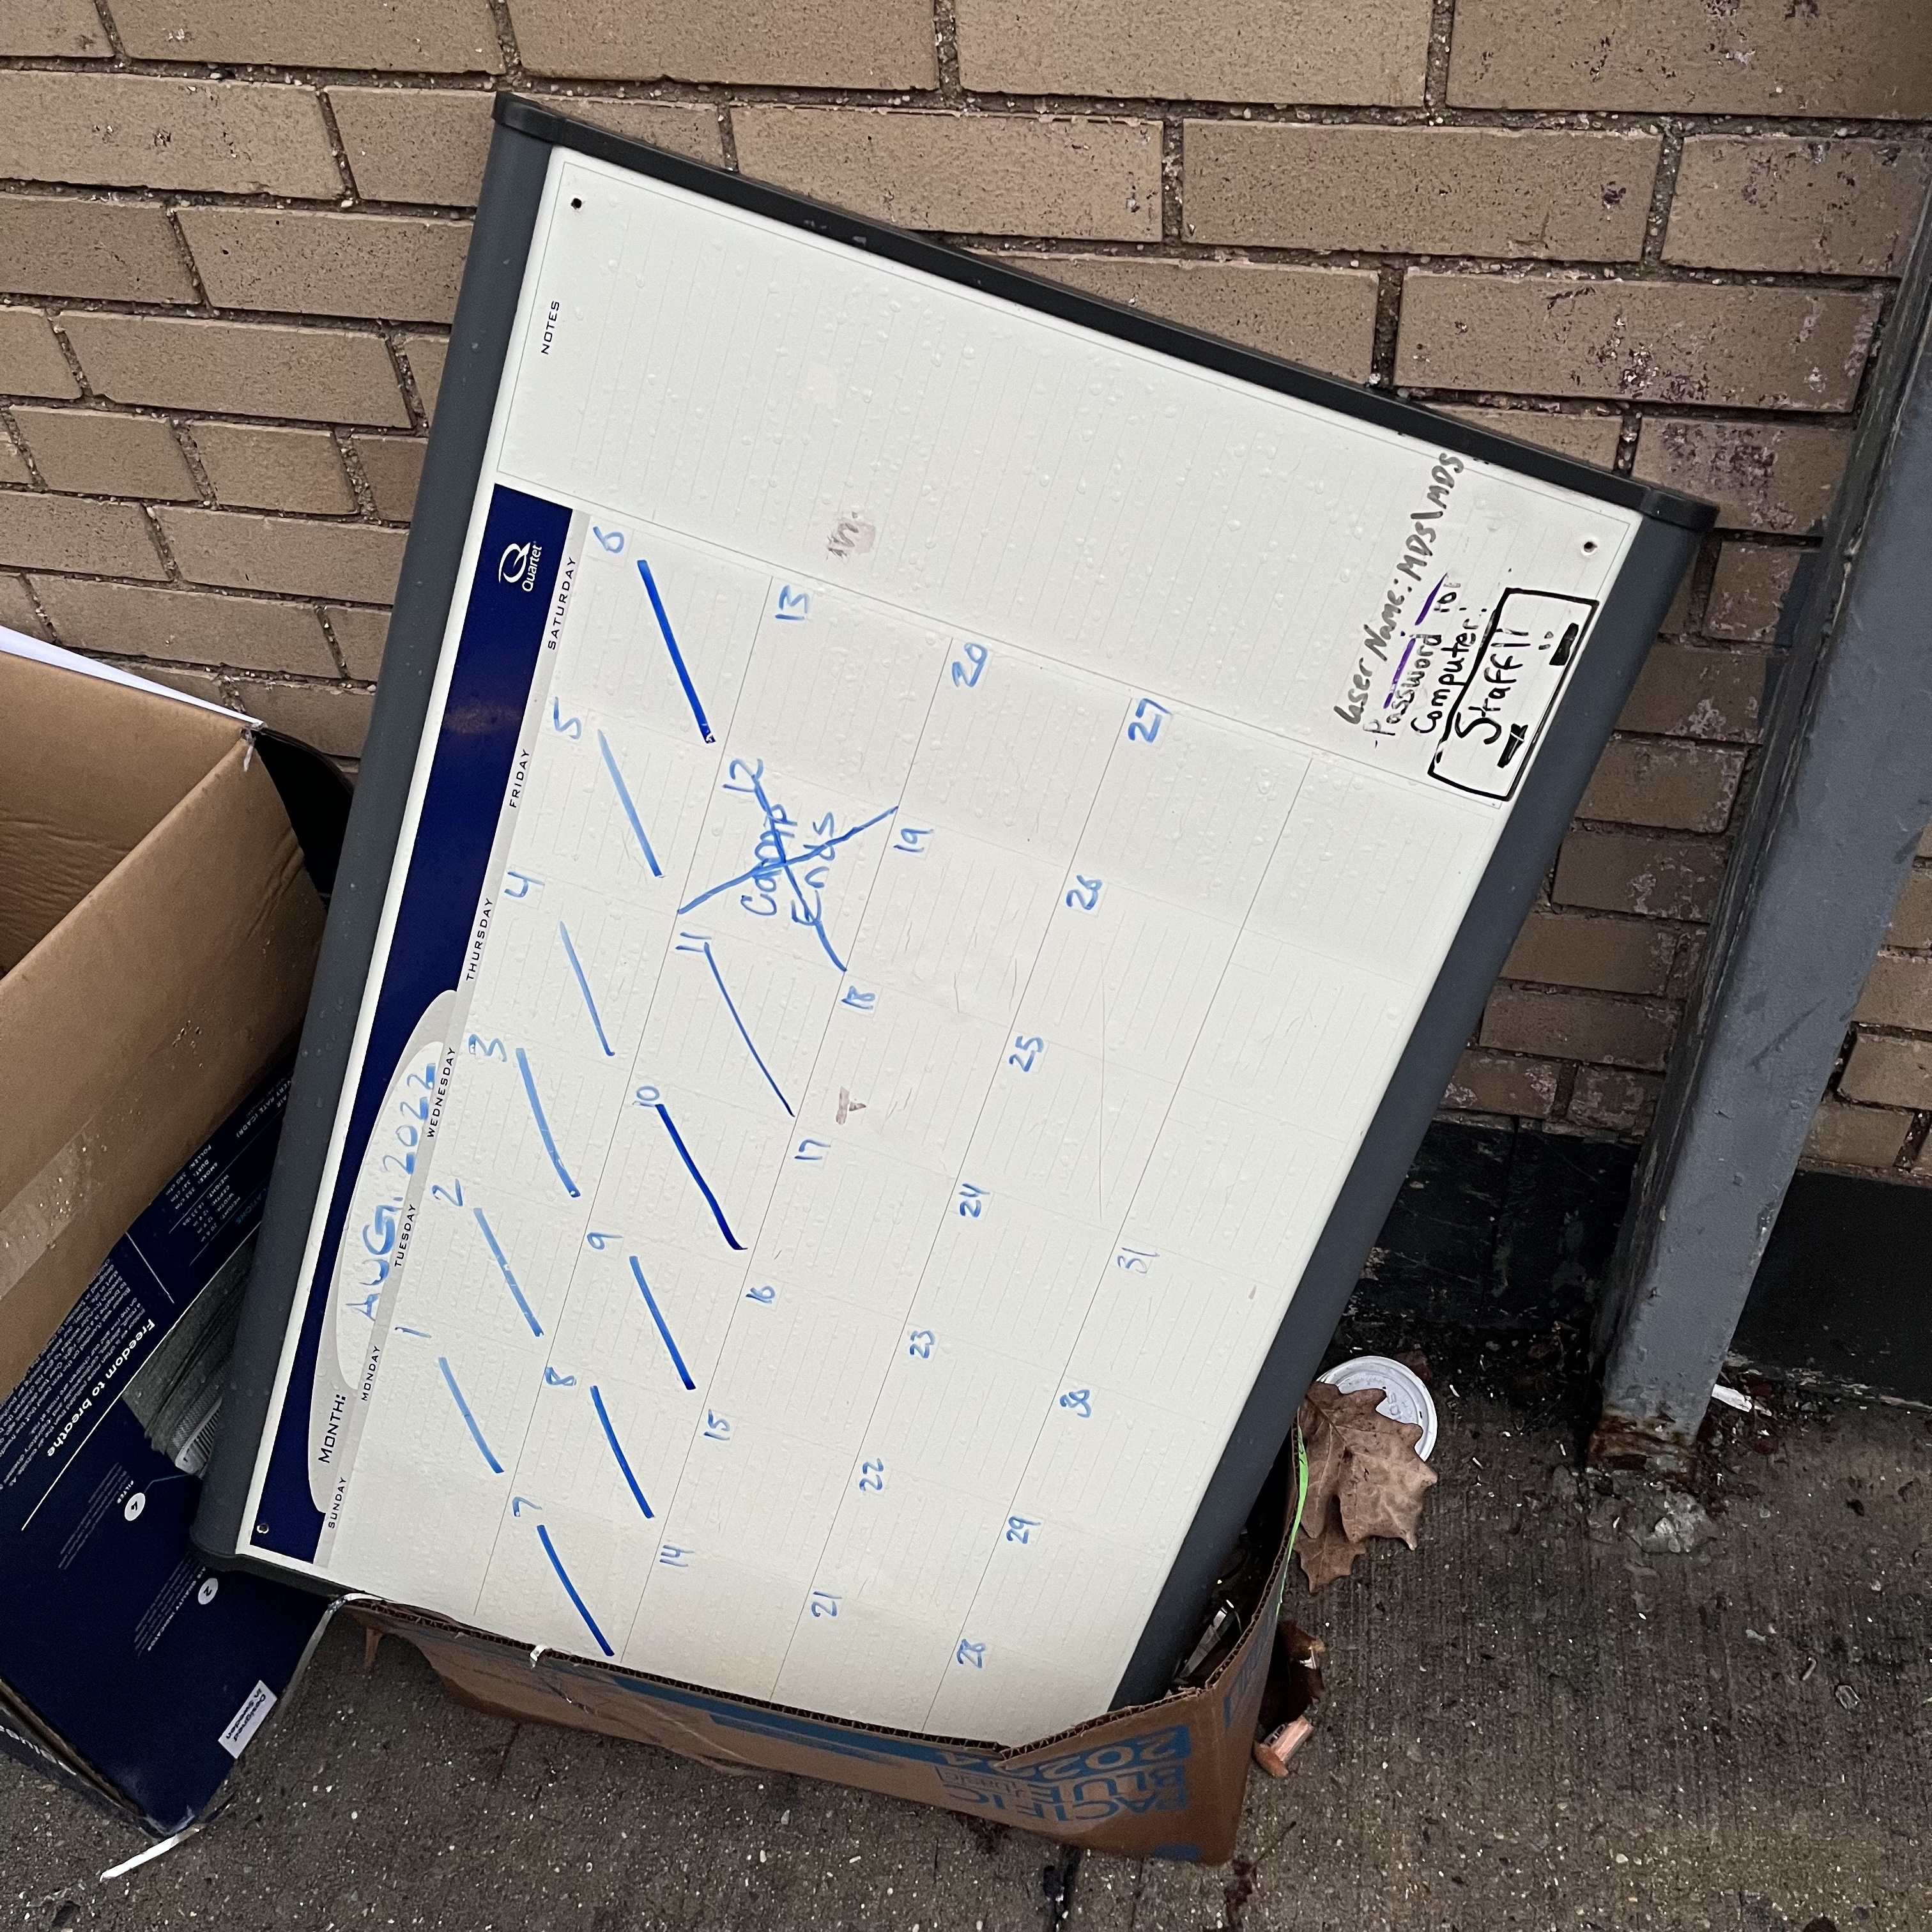 A discarded calendar shows when camp ended in 2022--and reveals the password to the staff computer. Exact location withheld to protect the security unconscious, Prospect Heights, Brooklyn